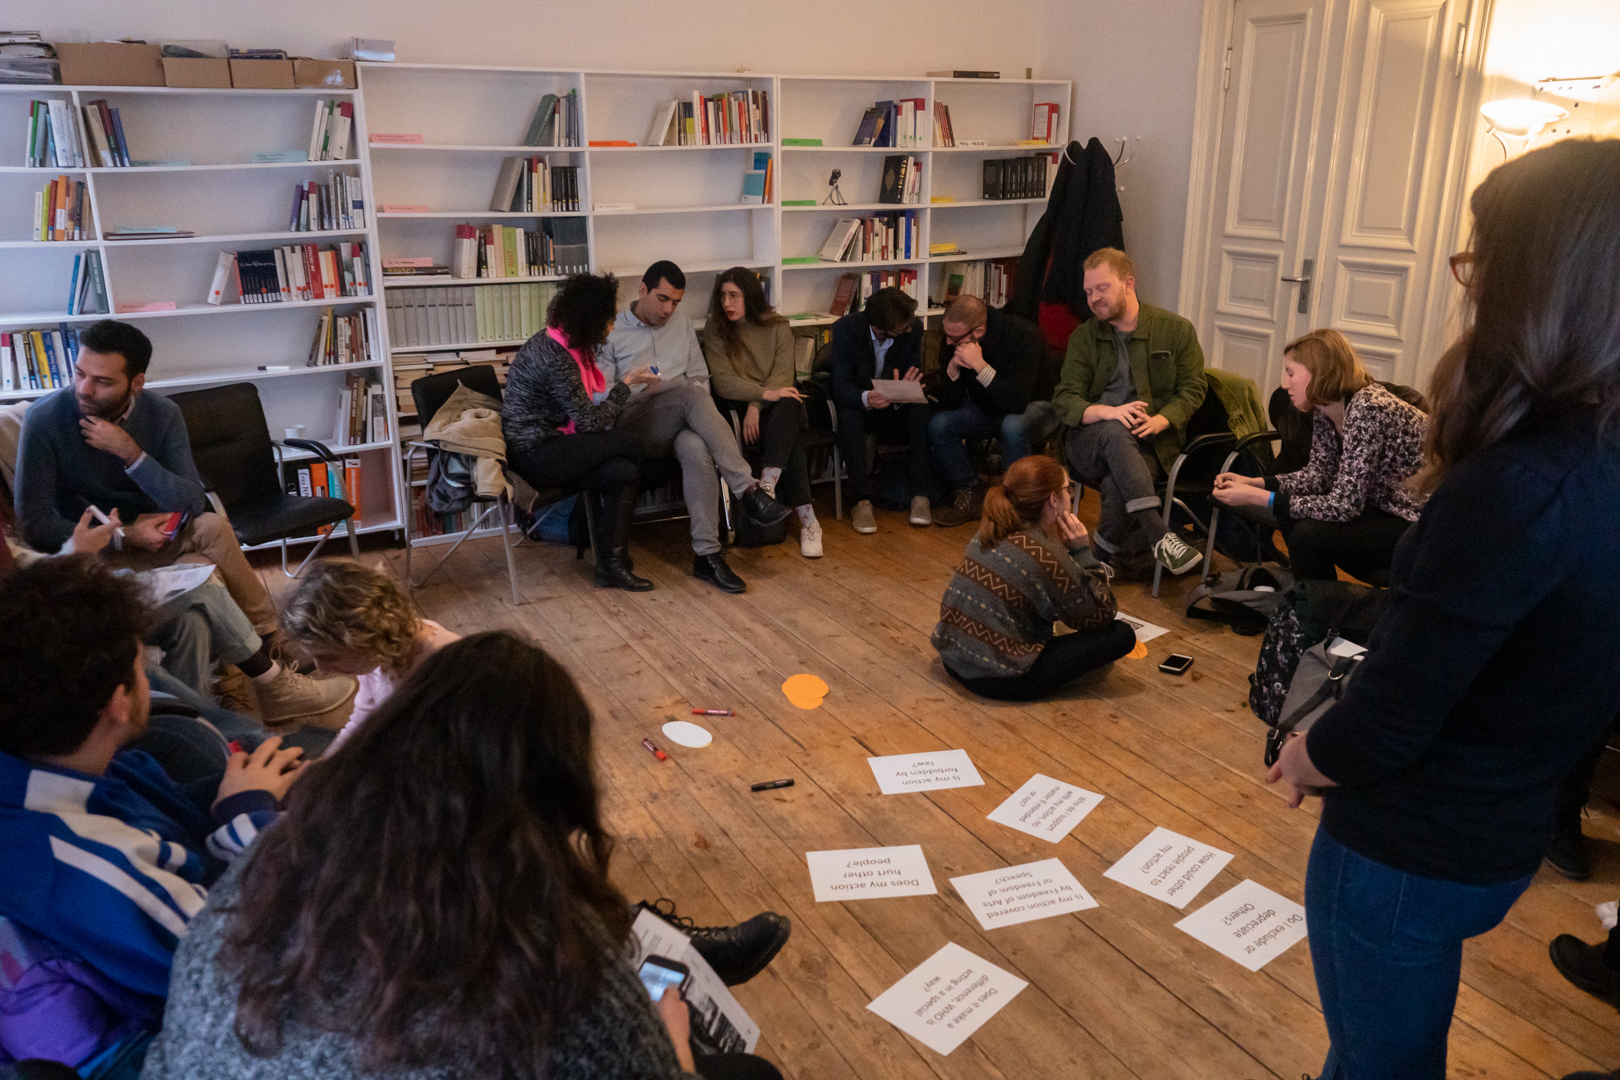 A trilateral seminar of young media professionals from Israel, Palestine, and Germany who took part in a workshop organized by the Kreuzberg initiative against anti-Semitism (KIgA), November 22, 2018. (Jugendpresse Deutschland/Omar Sheikh Dieh/CC BY 2.0)